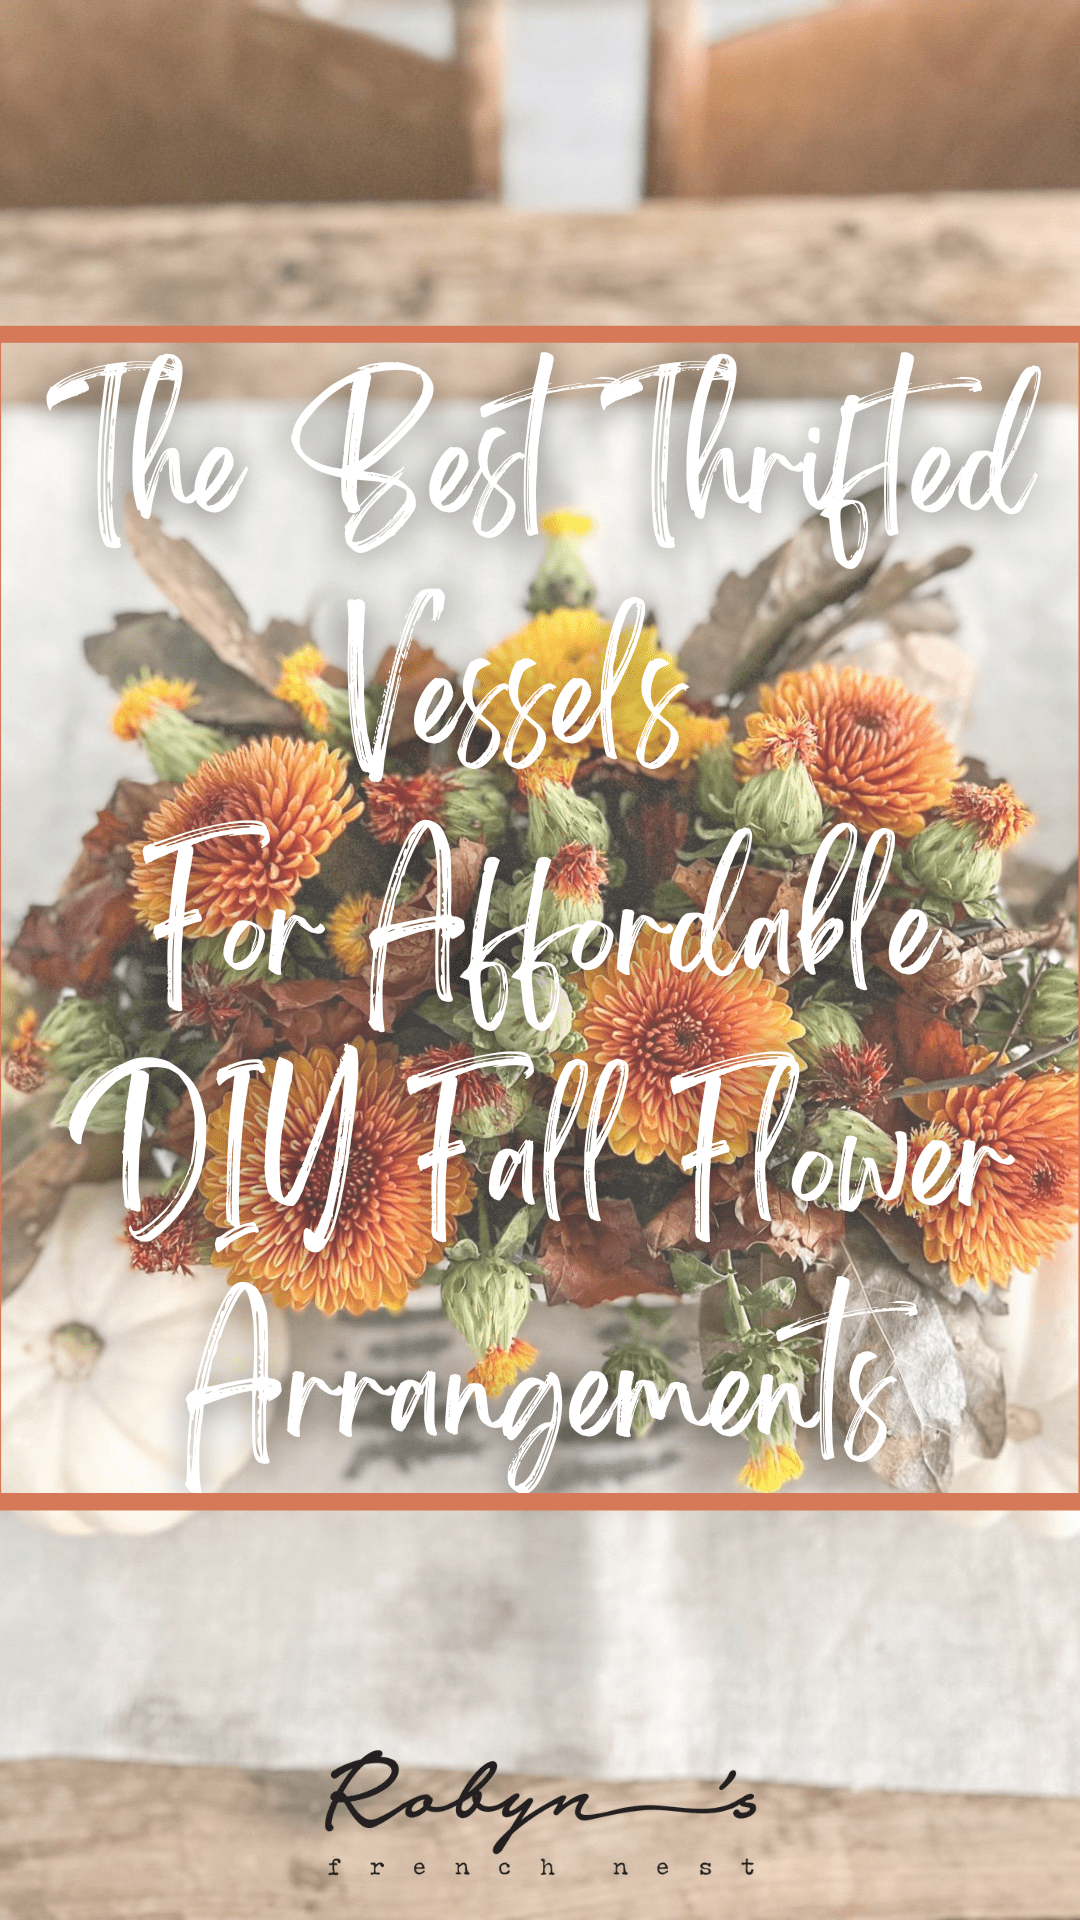 The Best Thrifted Vessels for Affordable DIY Fall Flower Arrangements